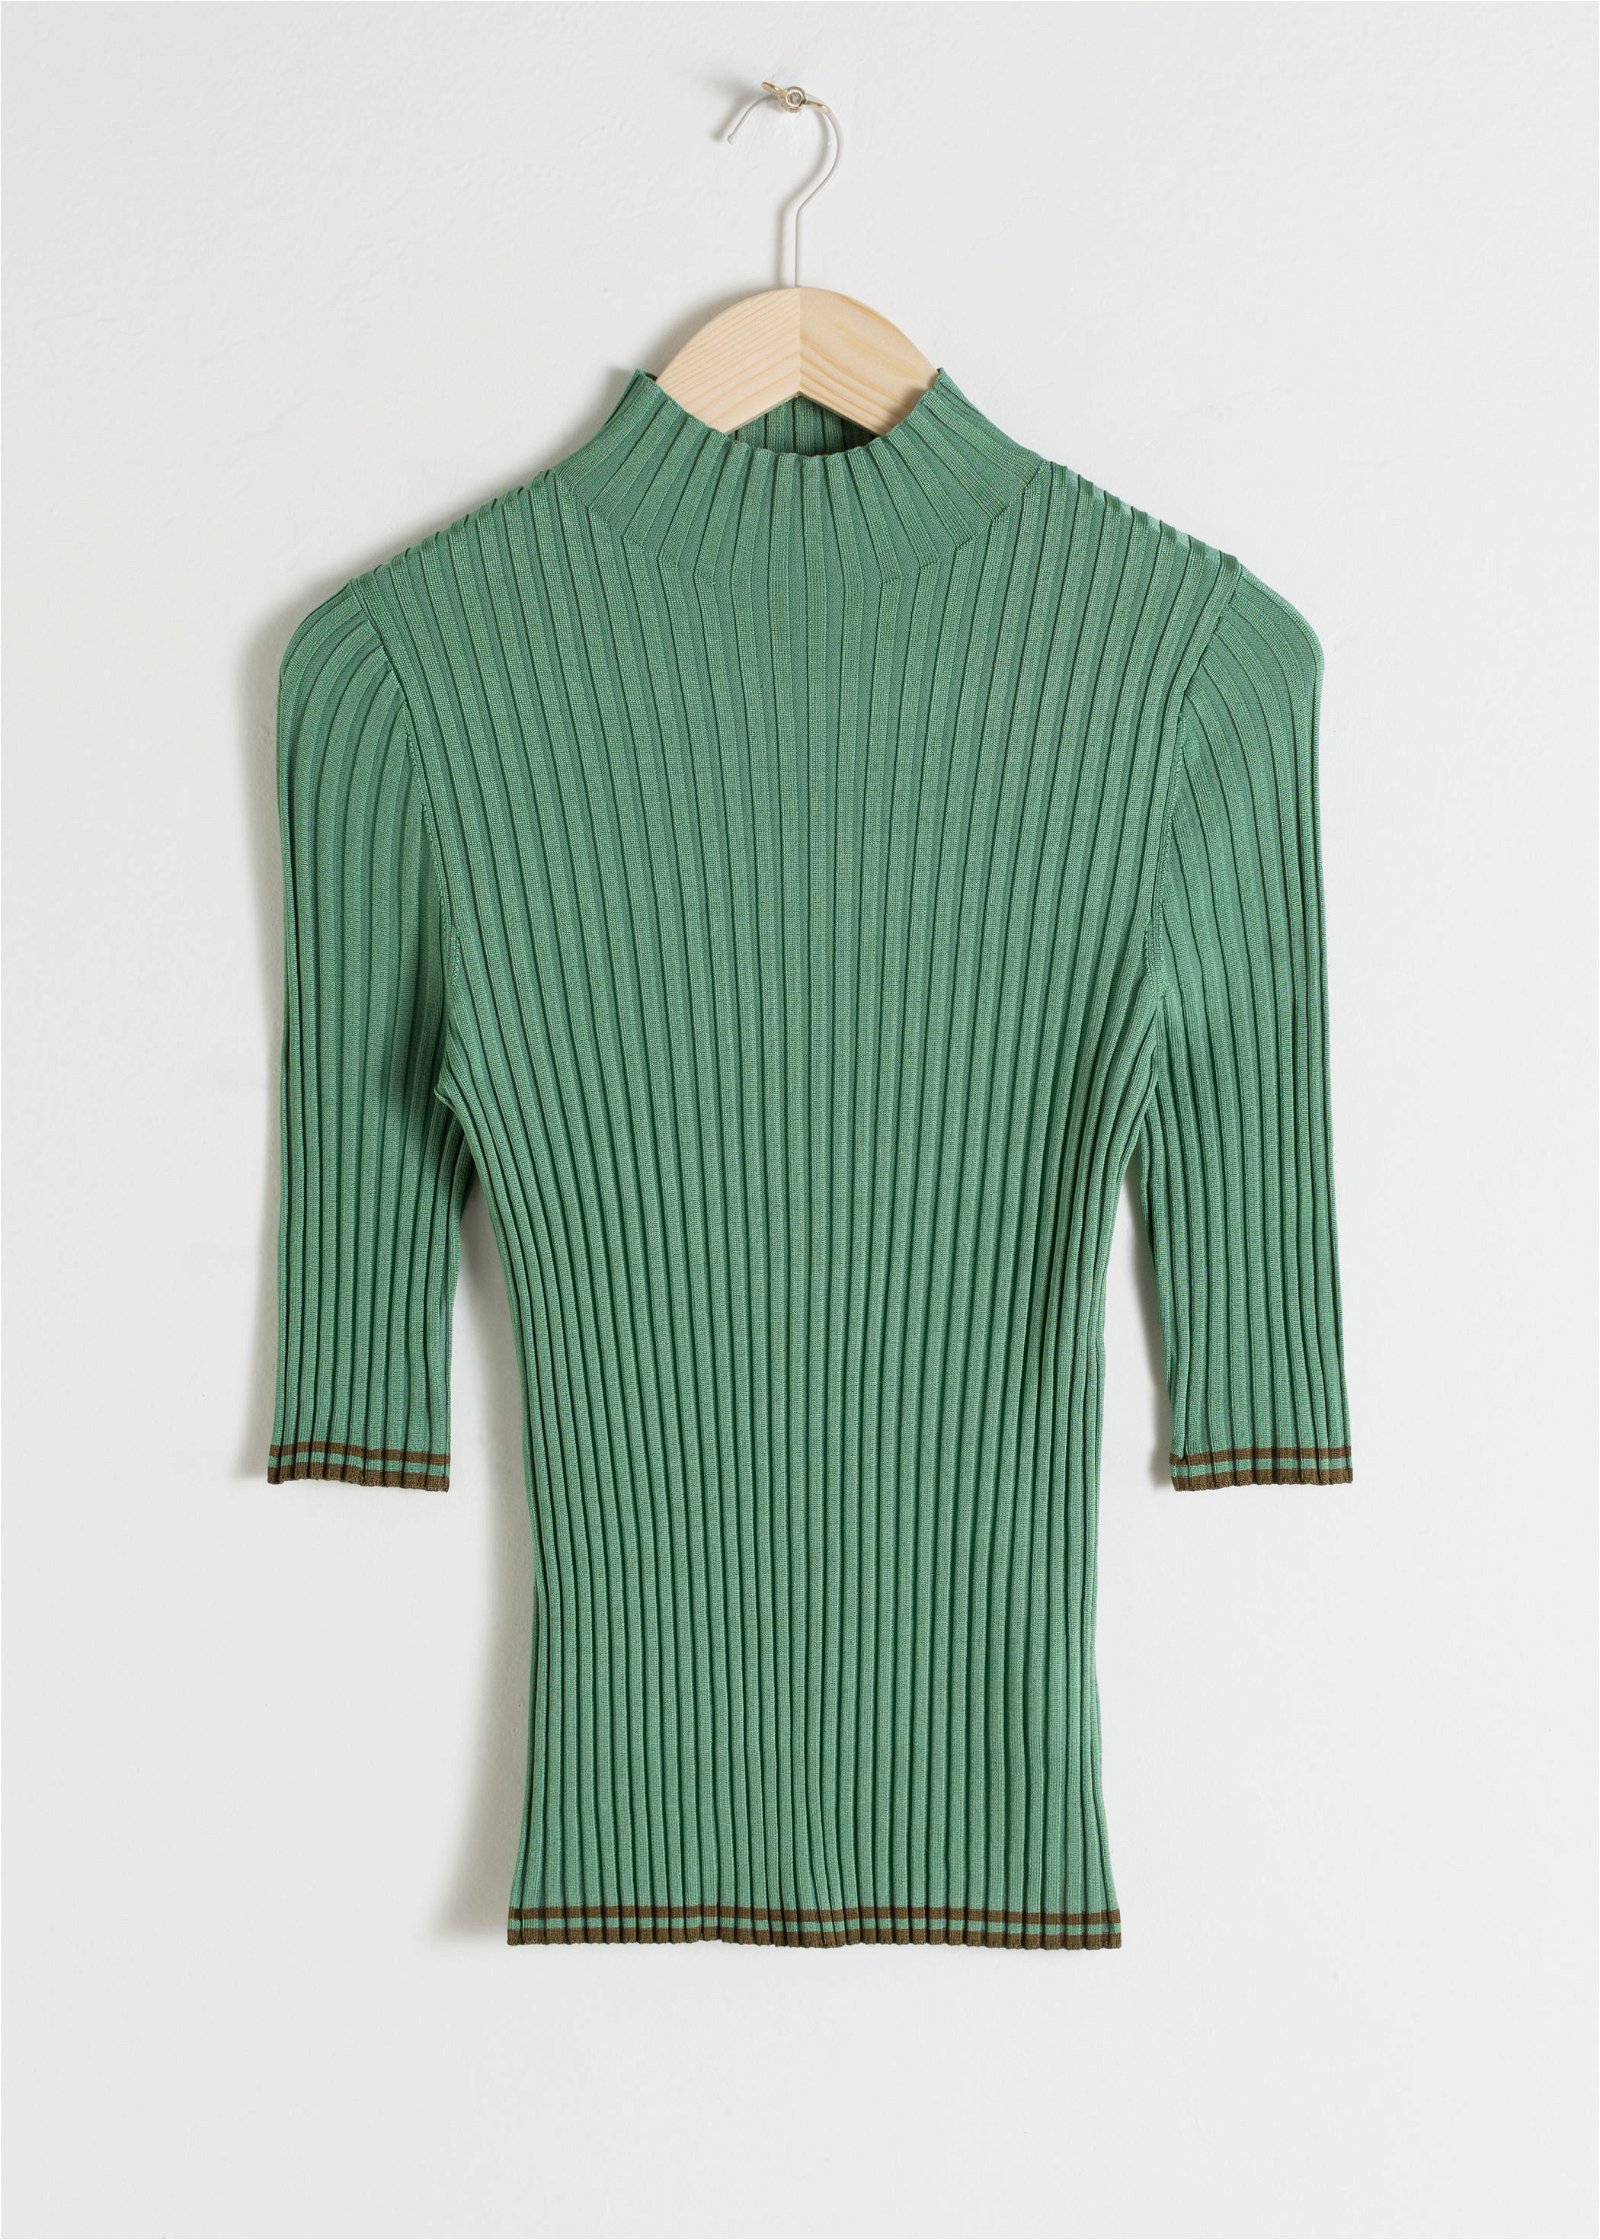 & OTHER STORIES Rib Knit Mock Neck Top in Pistachio | Endource